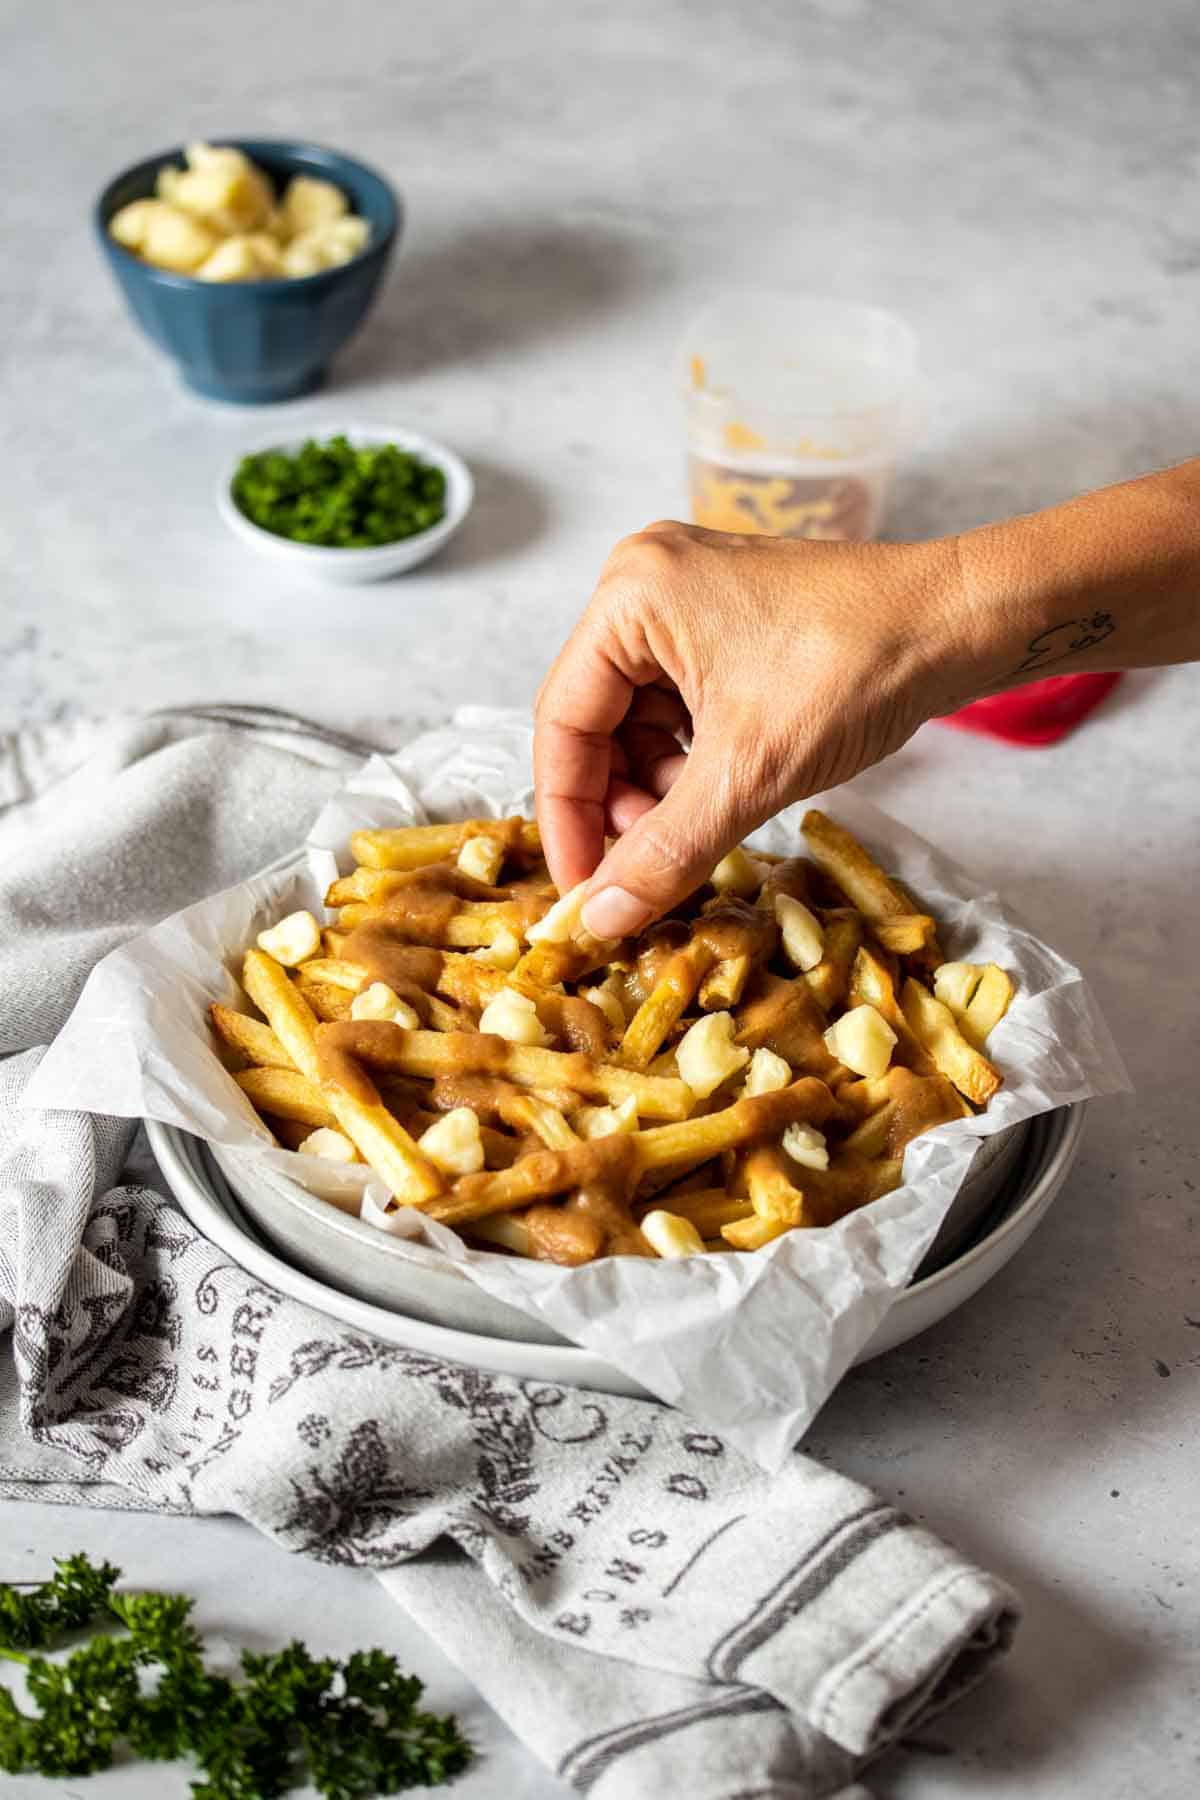 A hand putting cheese curds on a pile of french fries with gravy on them in a white bowl.